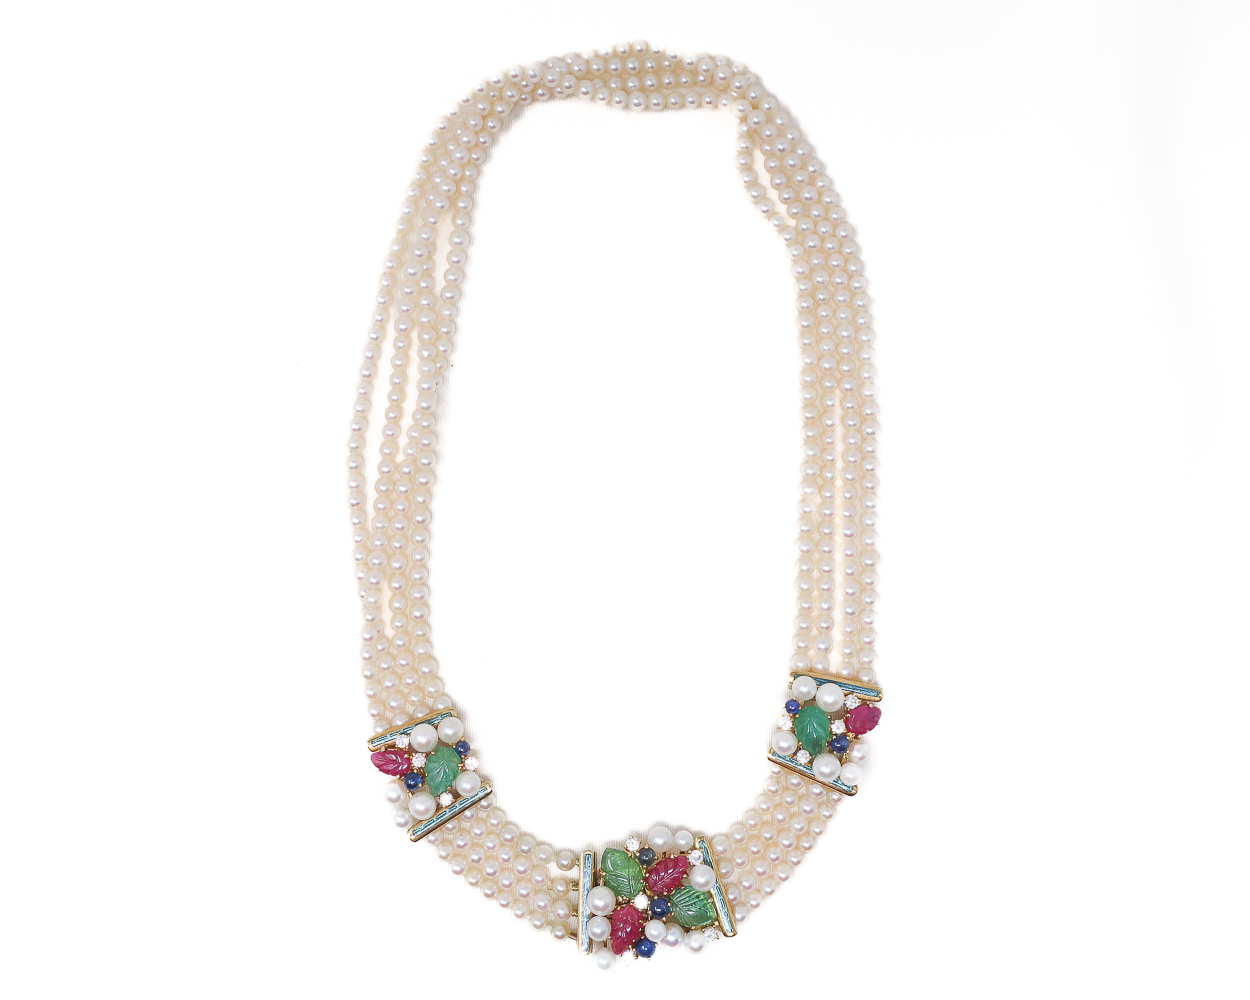 1970s Pearl Strand Necklace with Gemstones